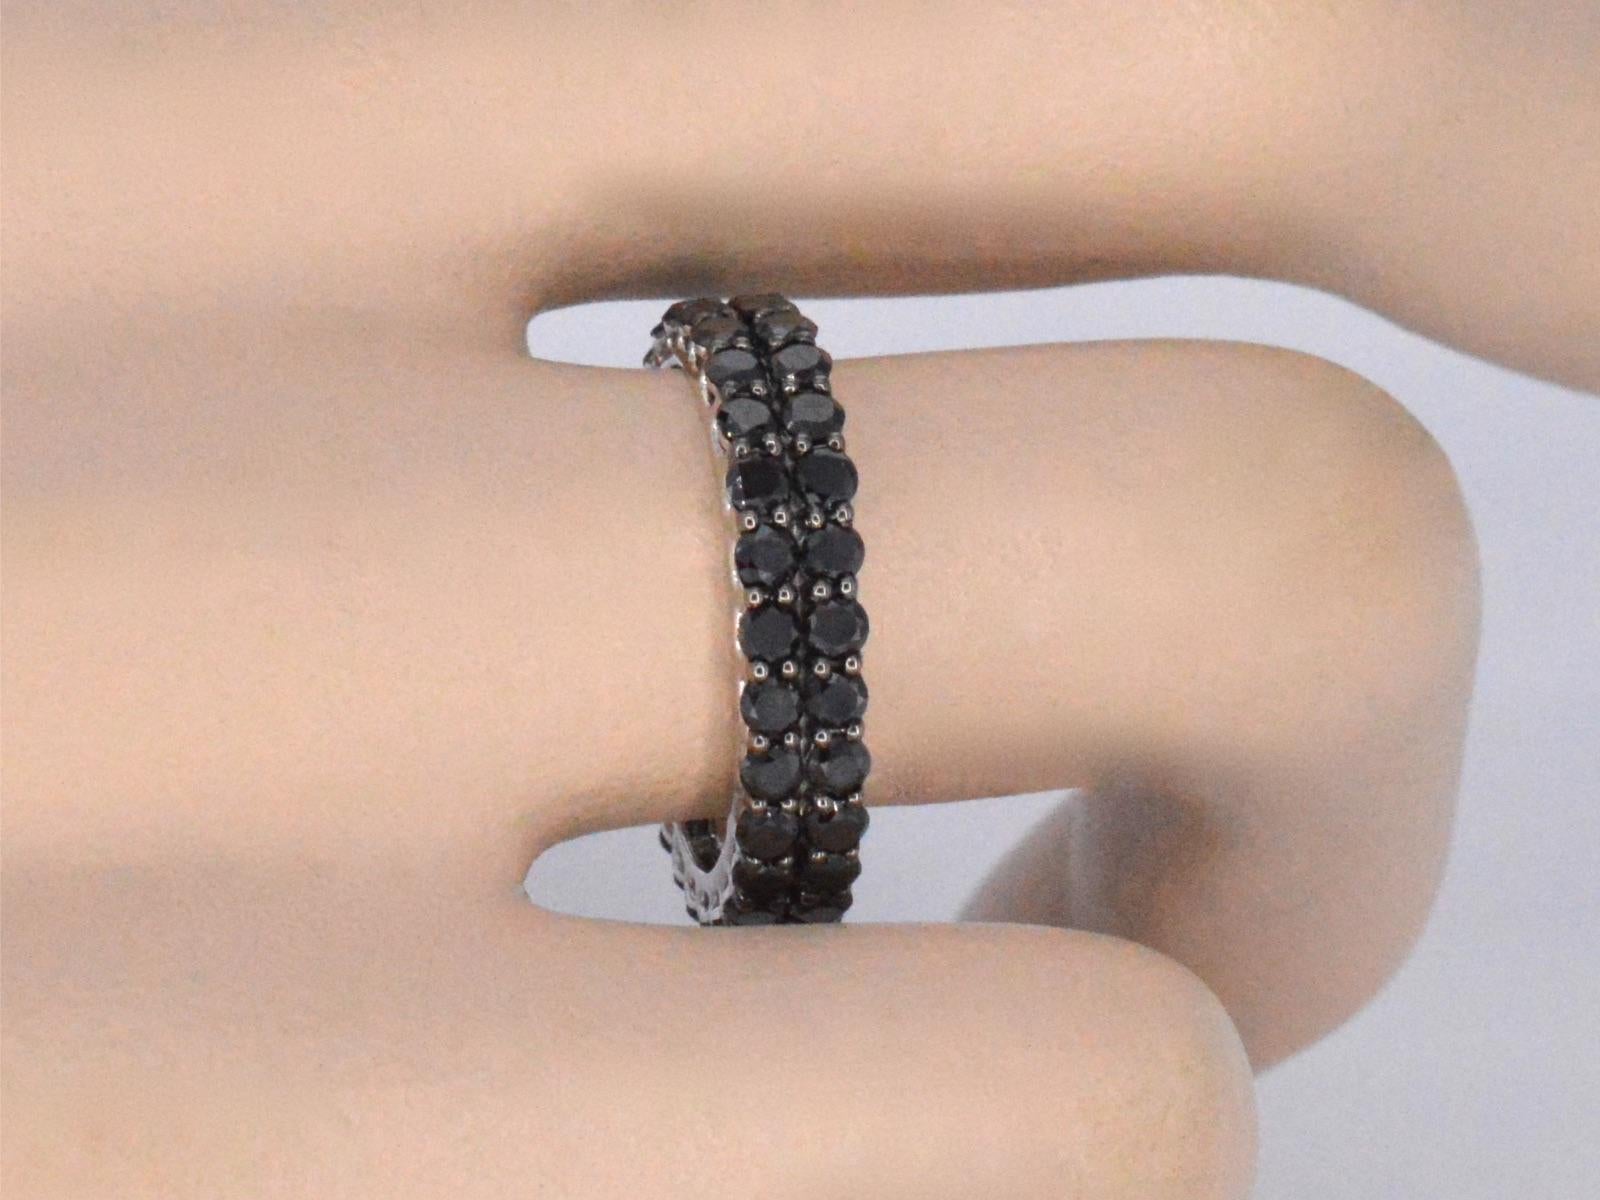 This white gold eternity ring is a sleek and stylish piece of jewelry, featuring a band of black diamonds that wrap all the way around the ring. The gold is a high-quality metal that is known for its durability and lustrous properties. The black